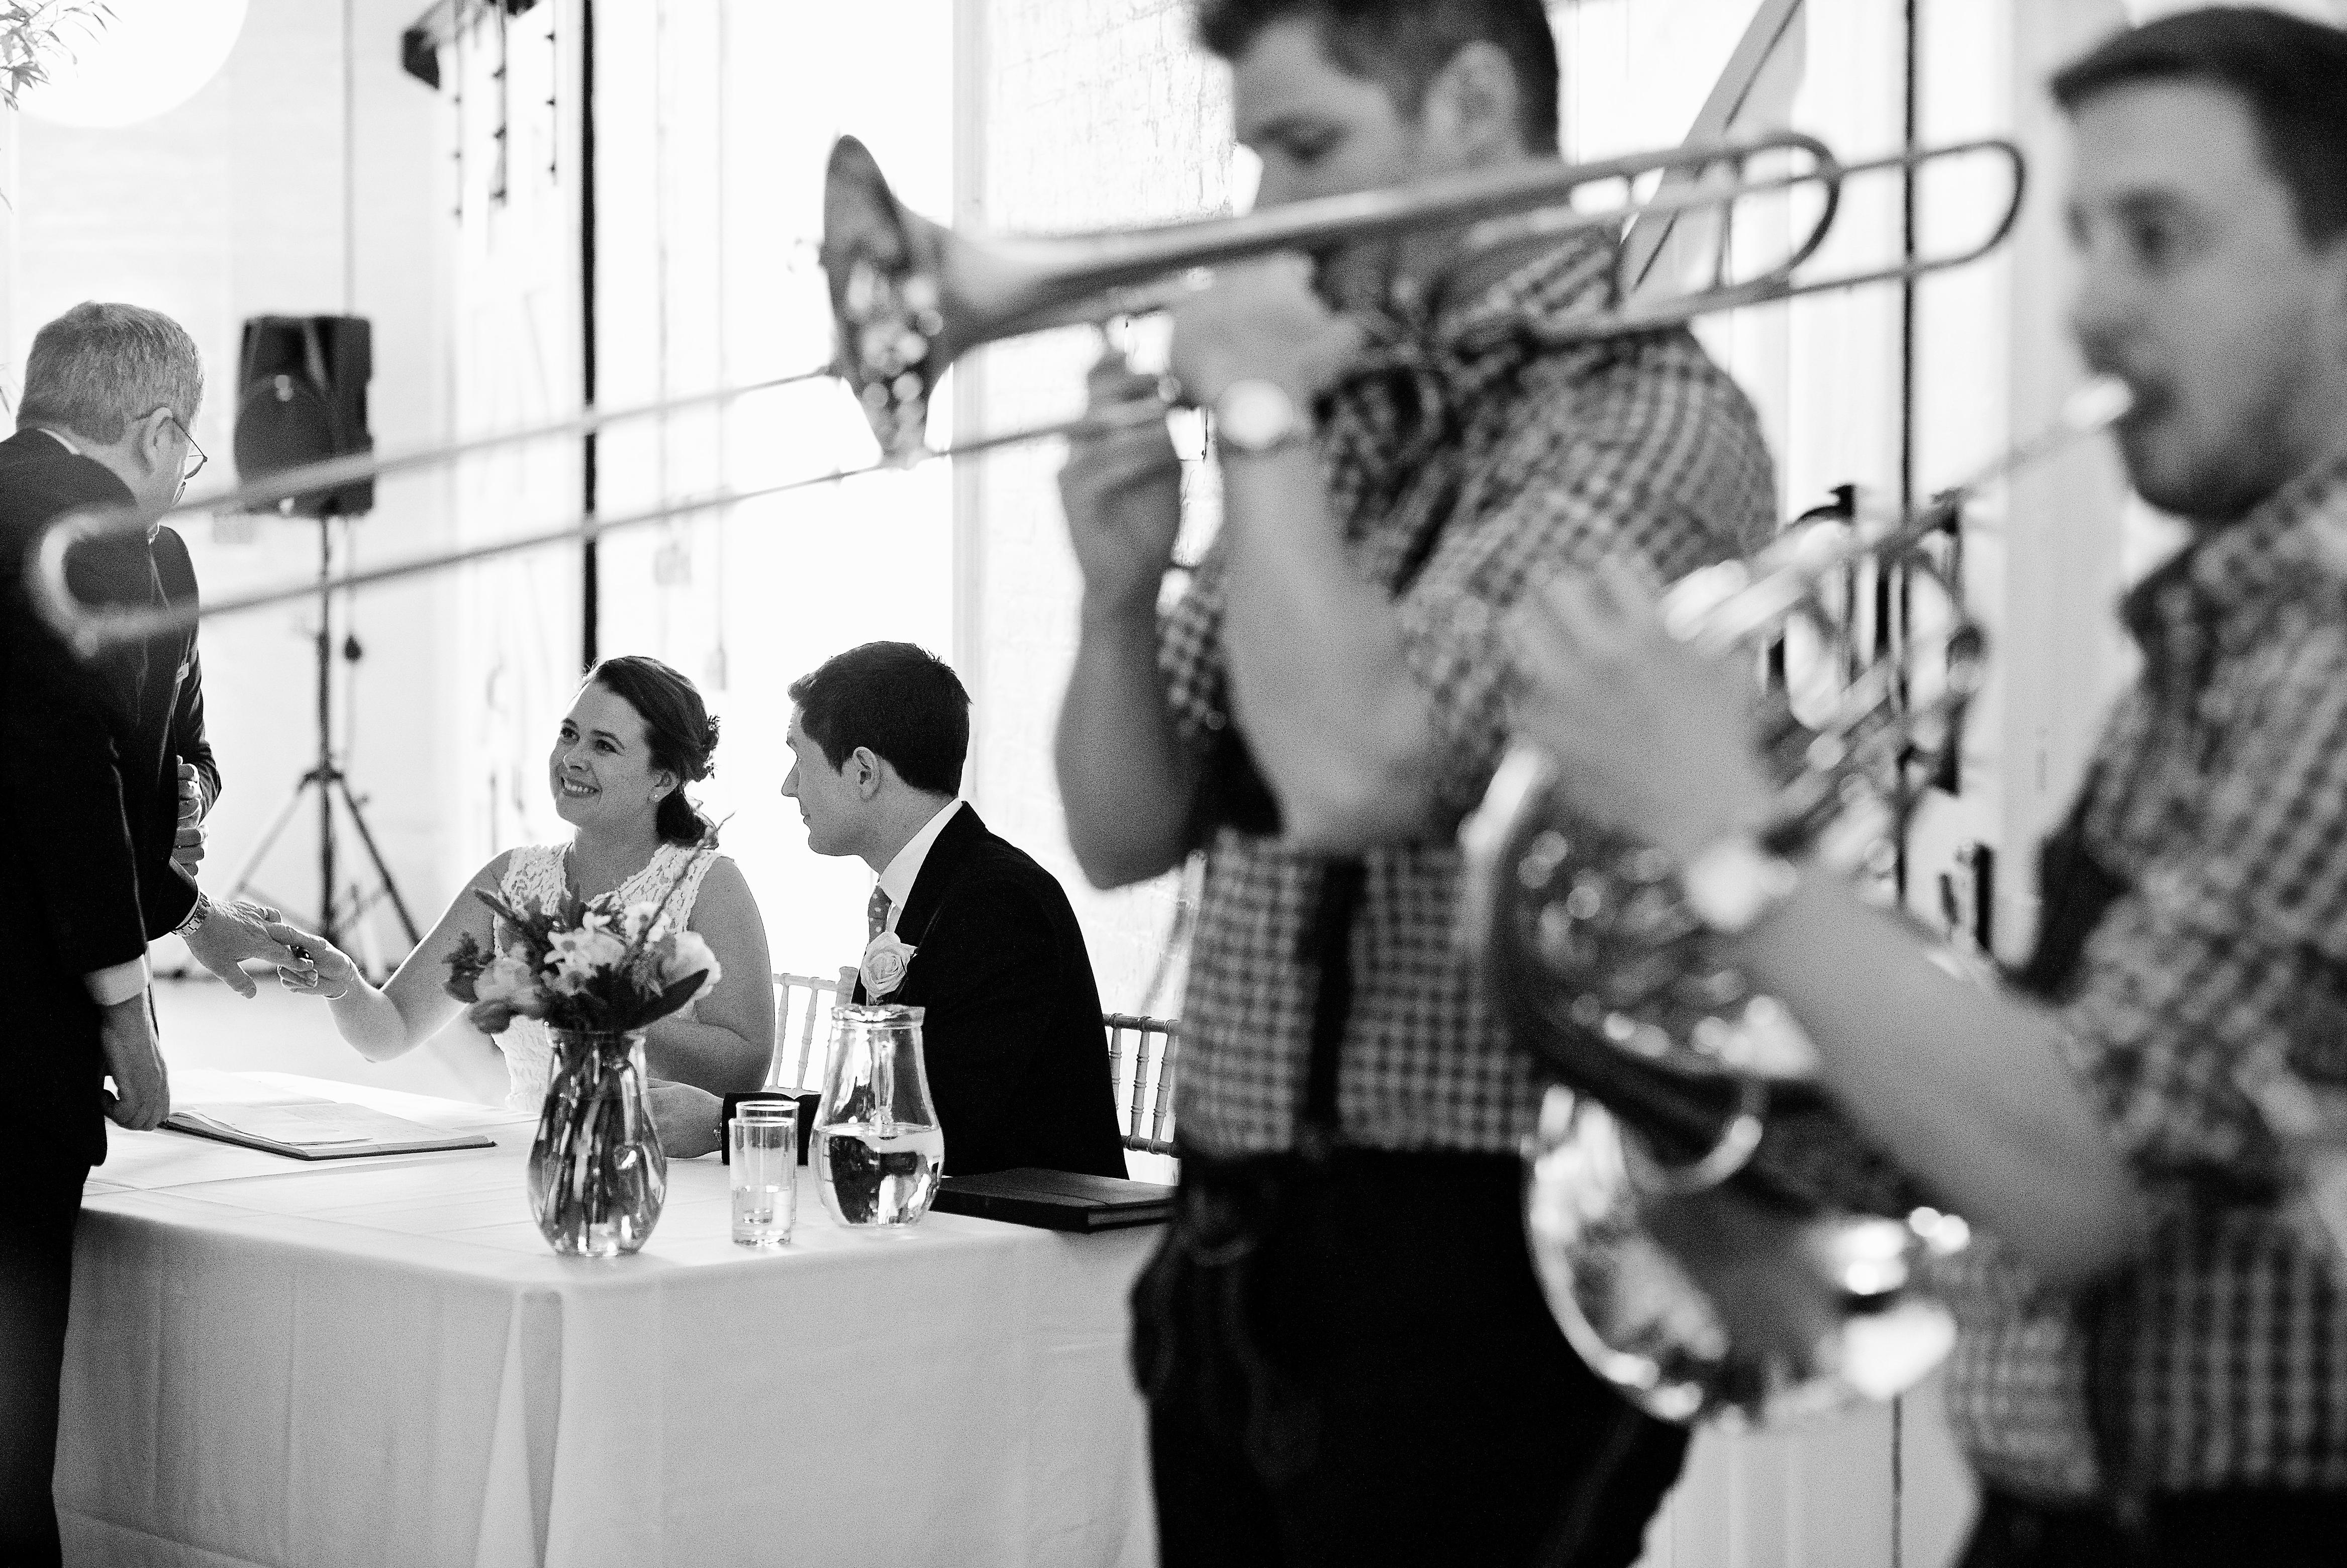 Brass band for wedding entertainment